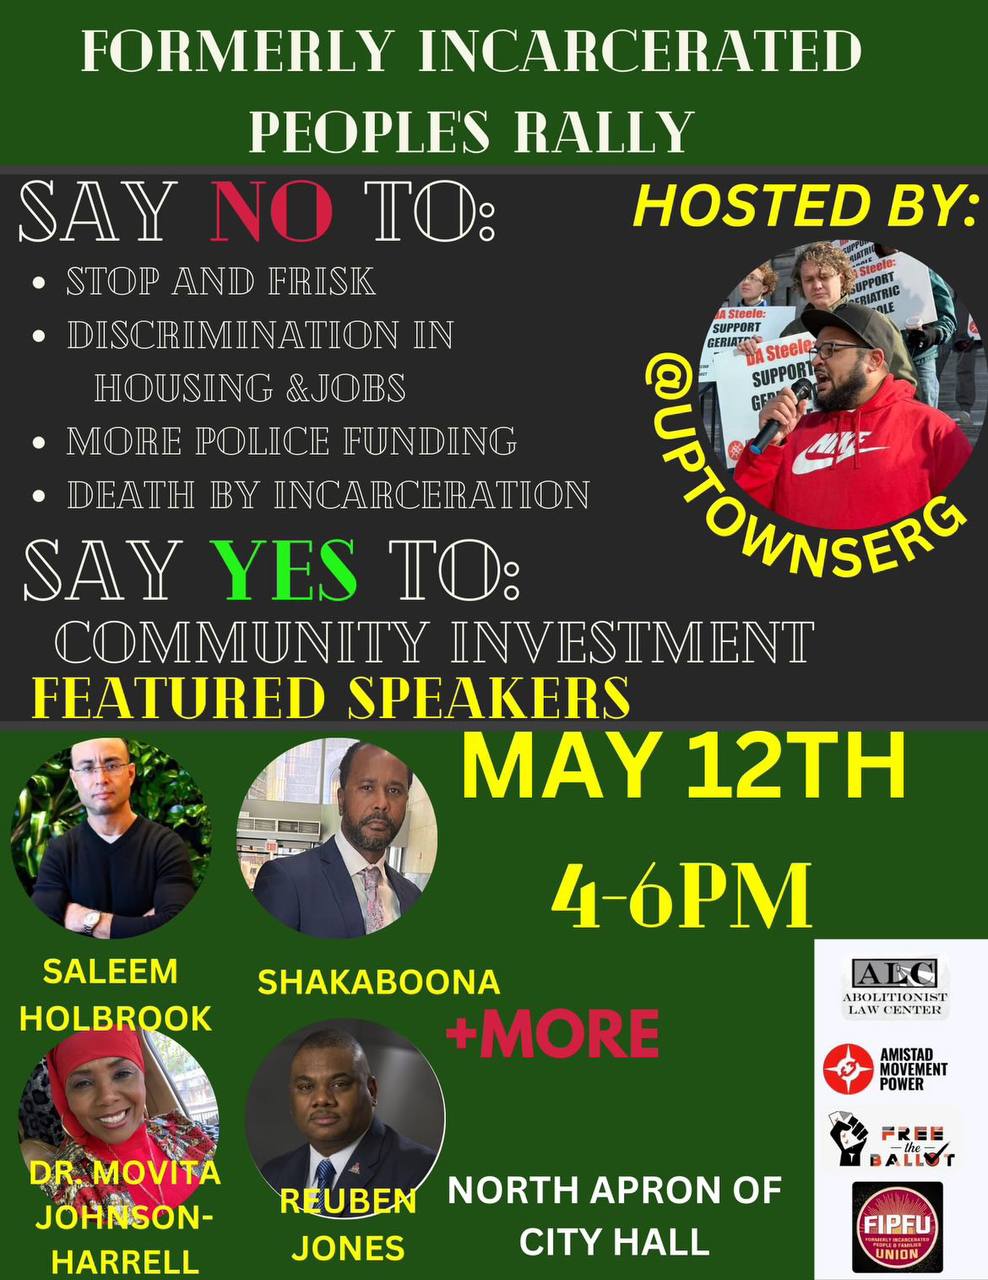 Flyer advertises a rally for Formerly Incarceraegd People on Friday, May 12th